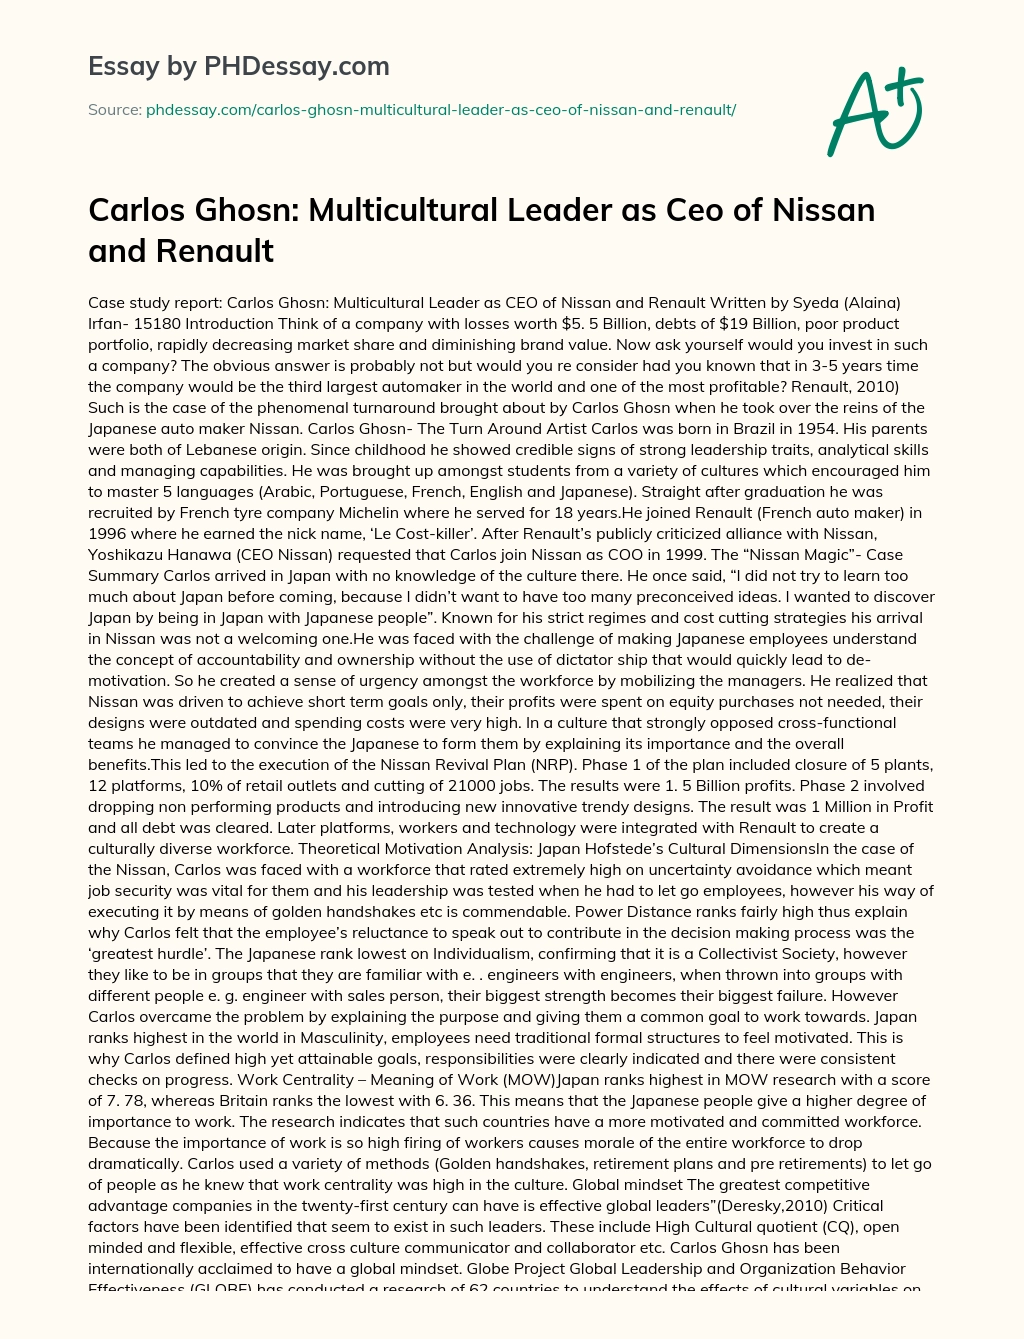 Carlos Ghosn: Multicultural Leader as Ceo of Nissan and Renault essay